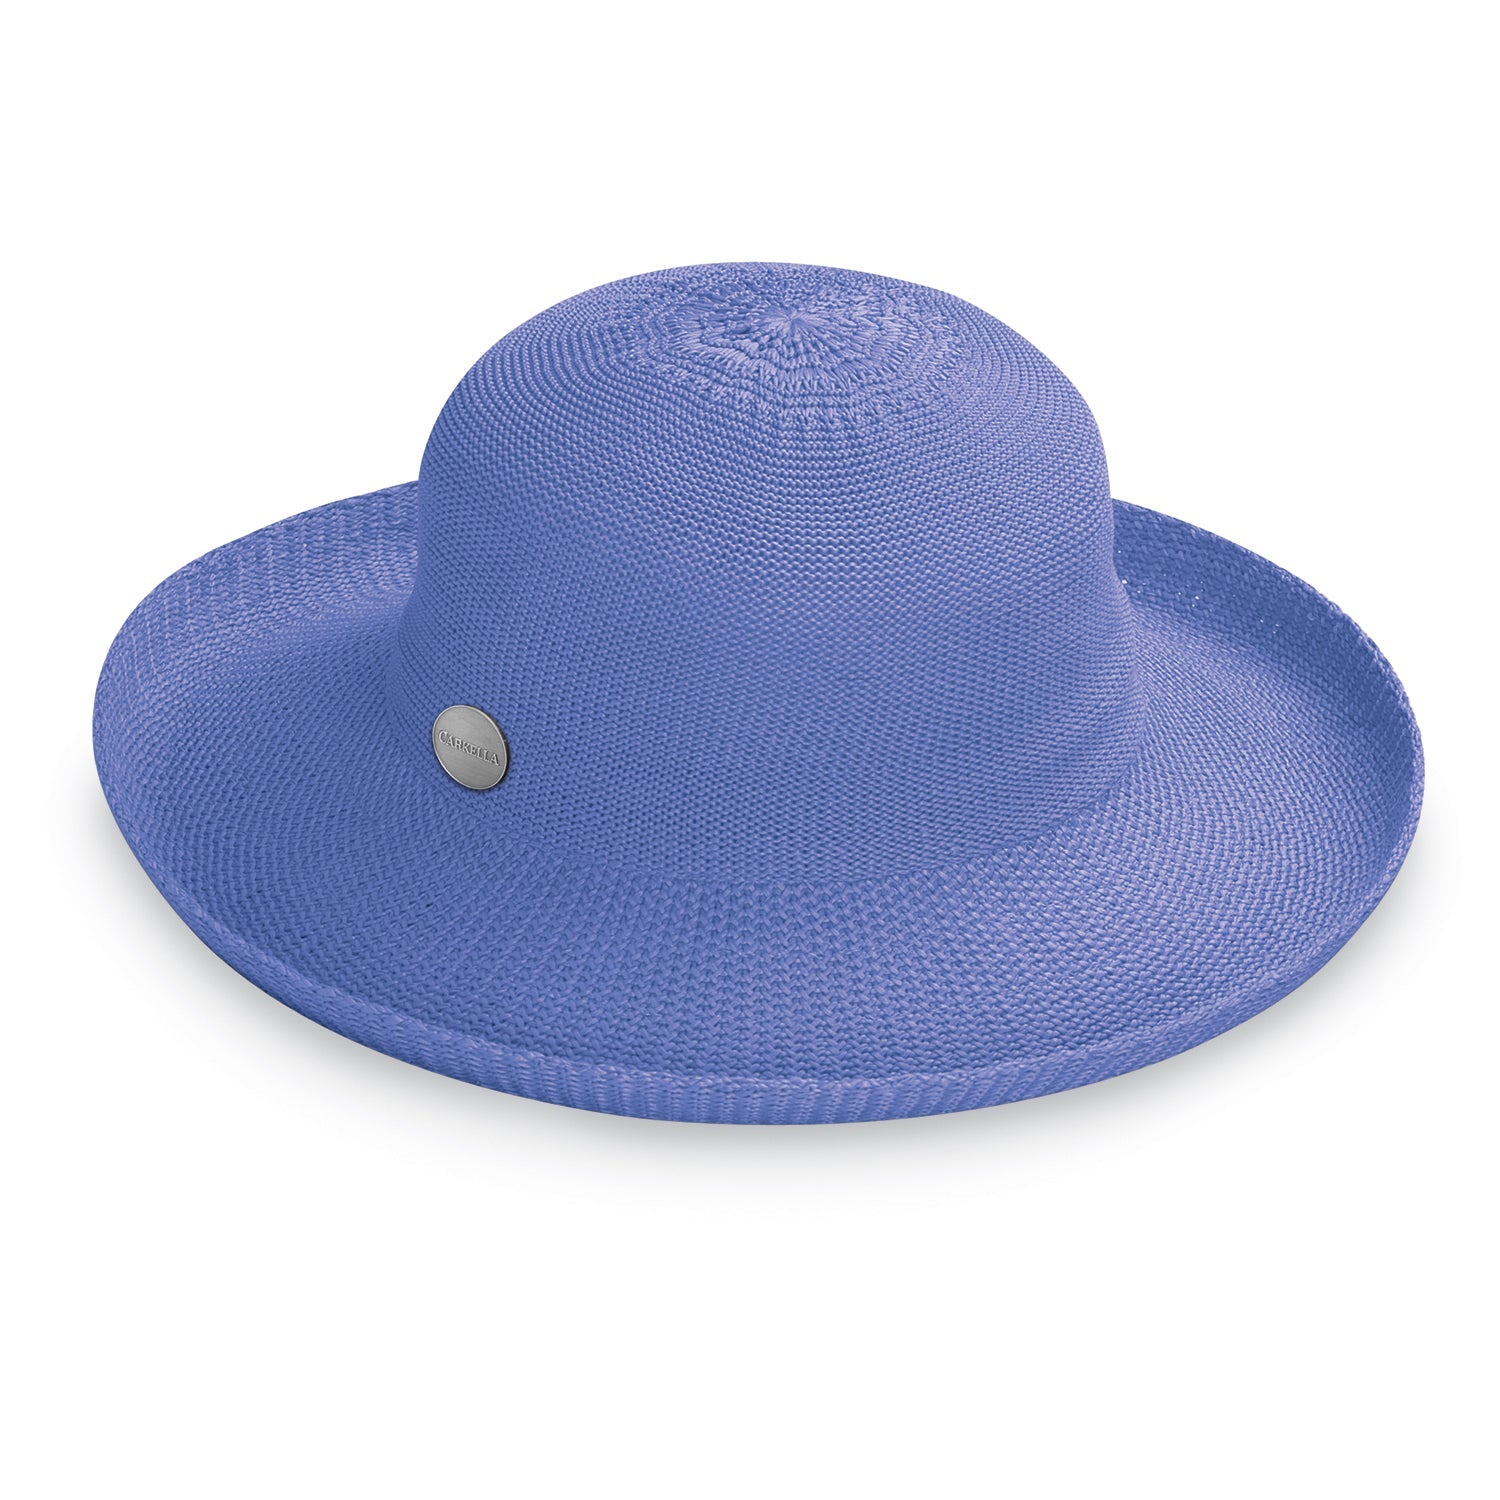 Featuring Front of Ladies' Packable Wide Brim Crown Style Victoria UPF Sun Hat from Carkella